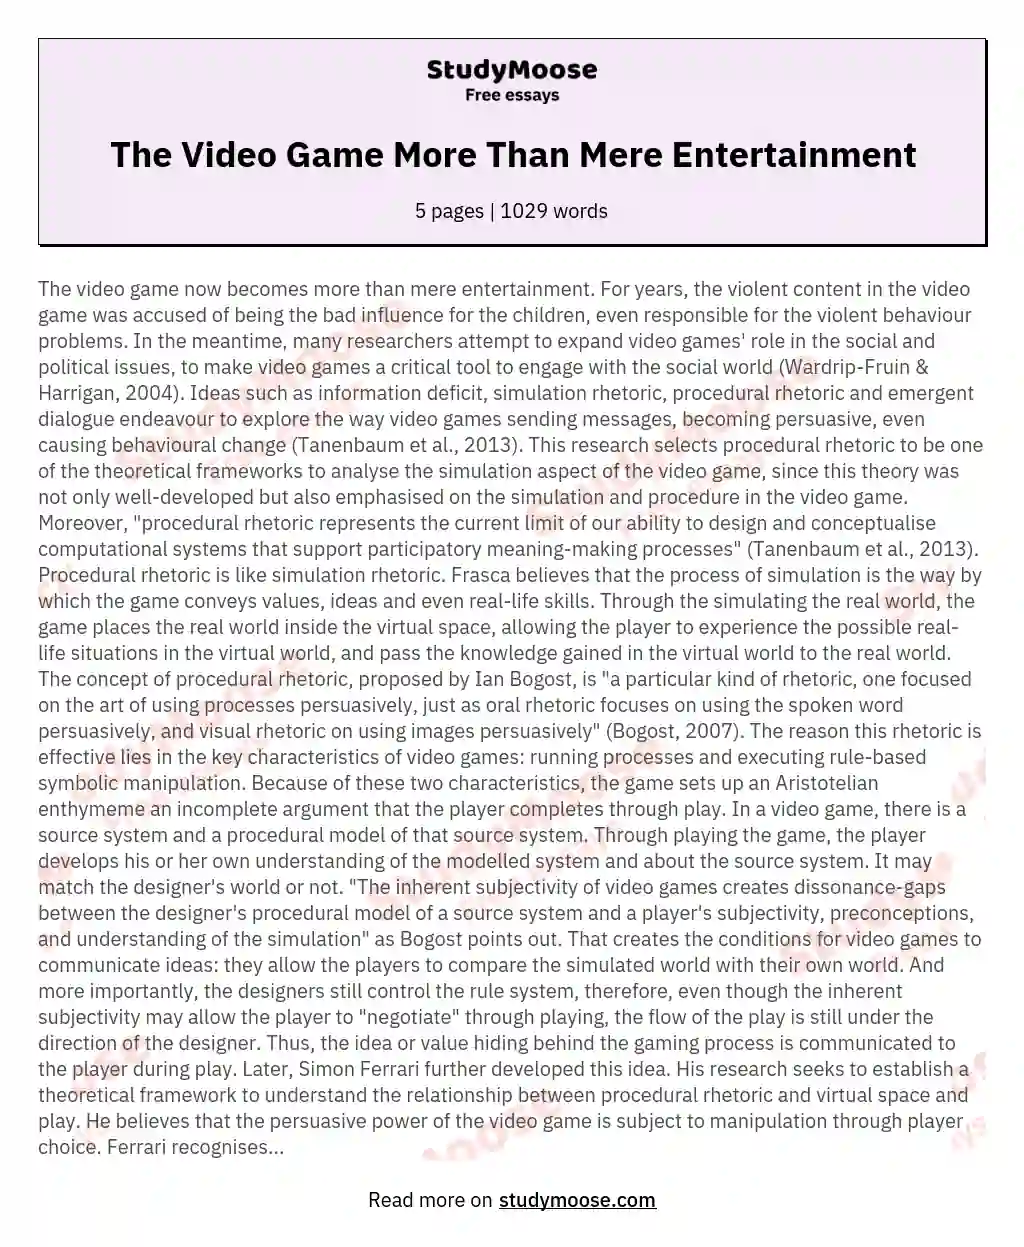 The Video Game More Than Mere Entertainment